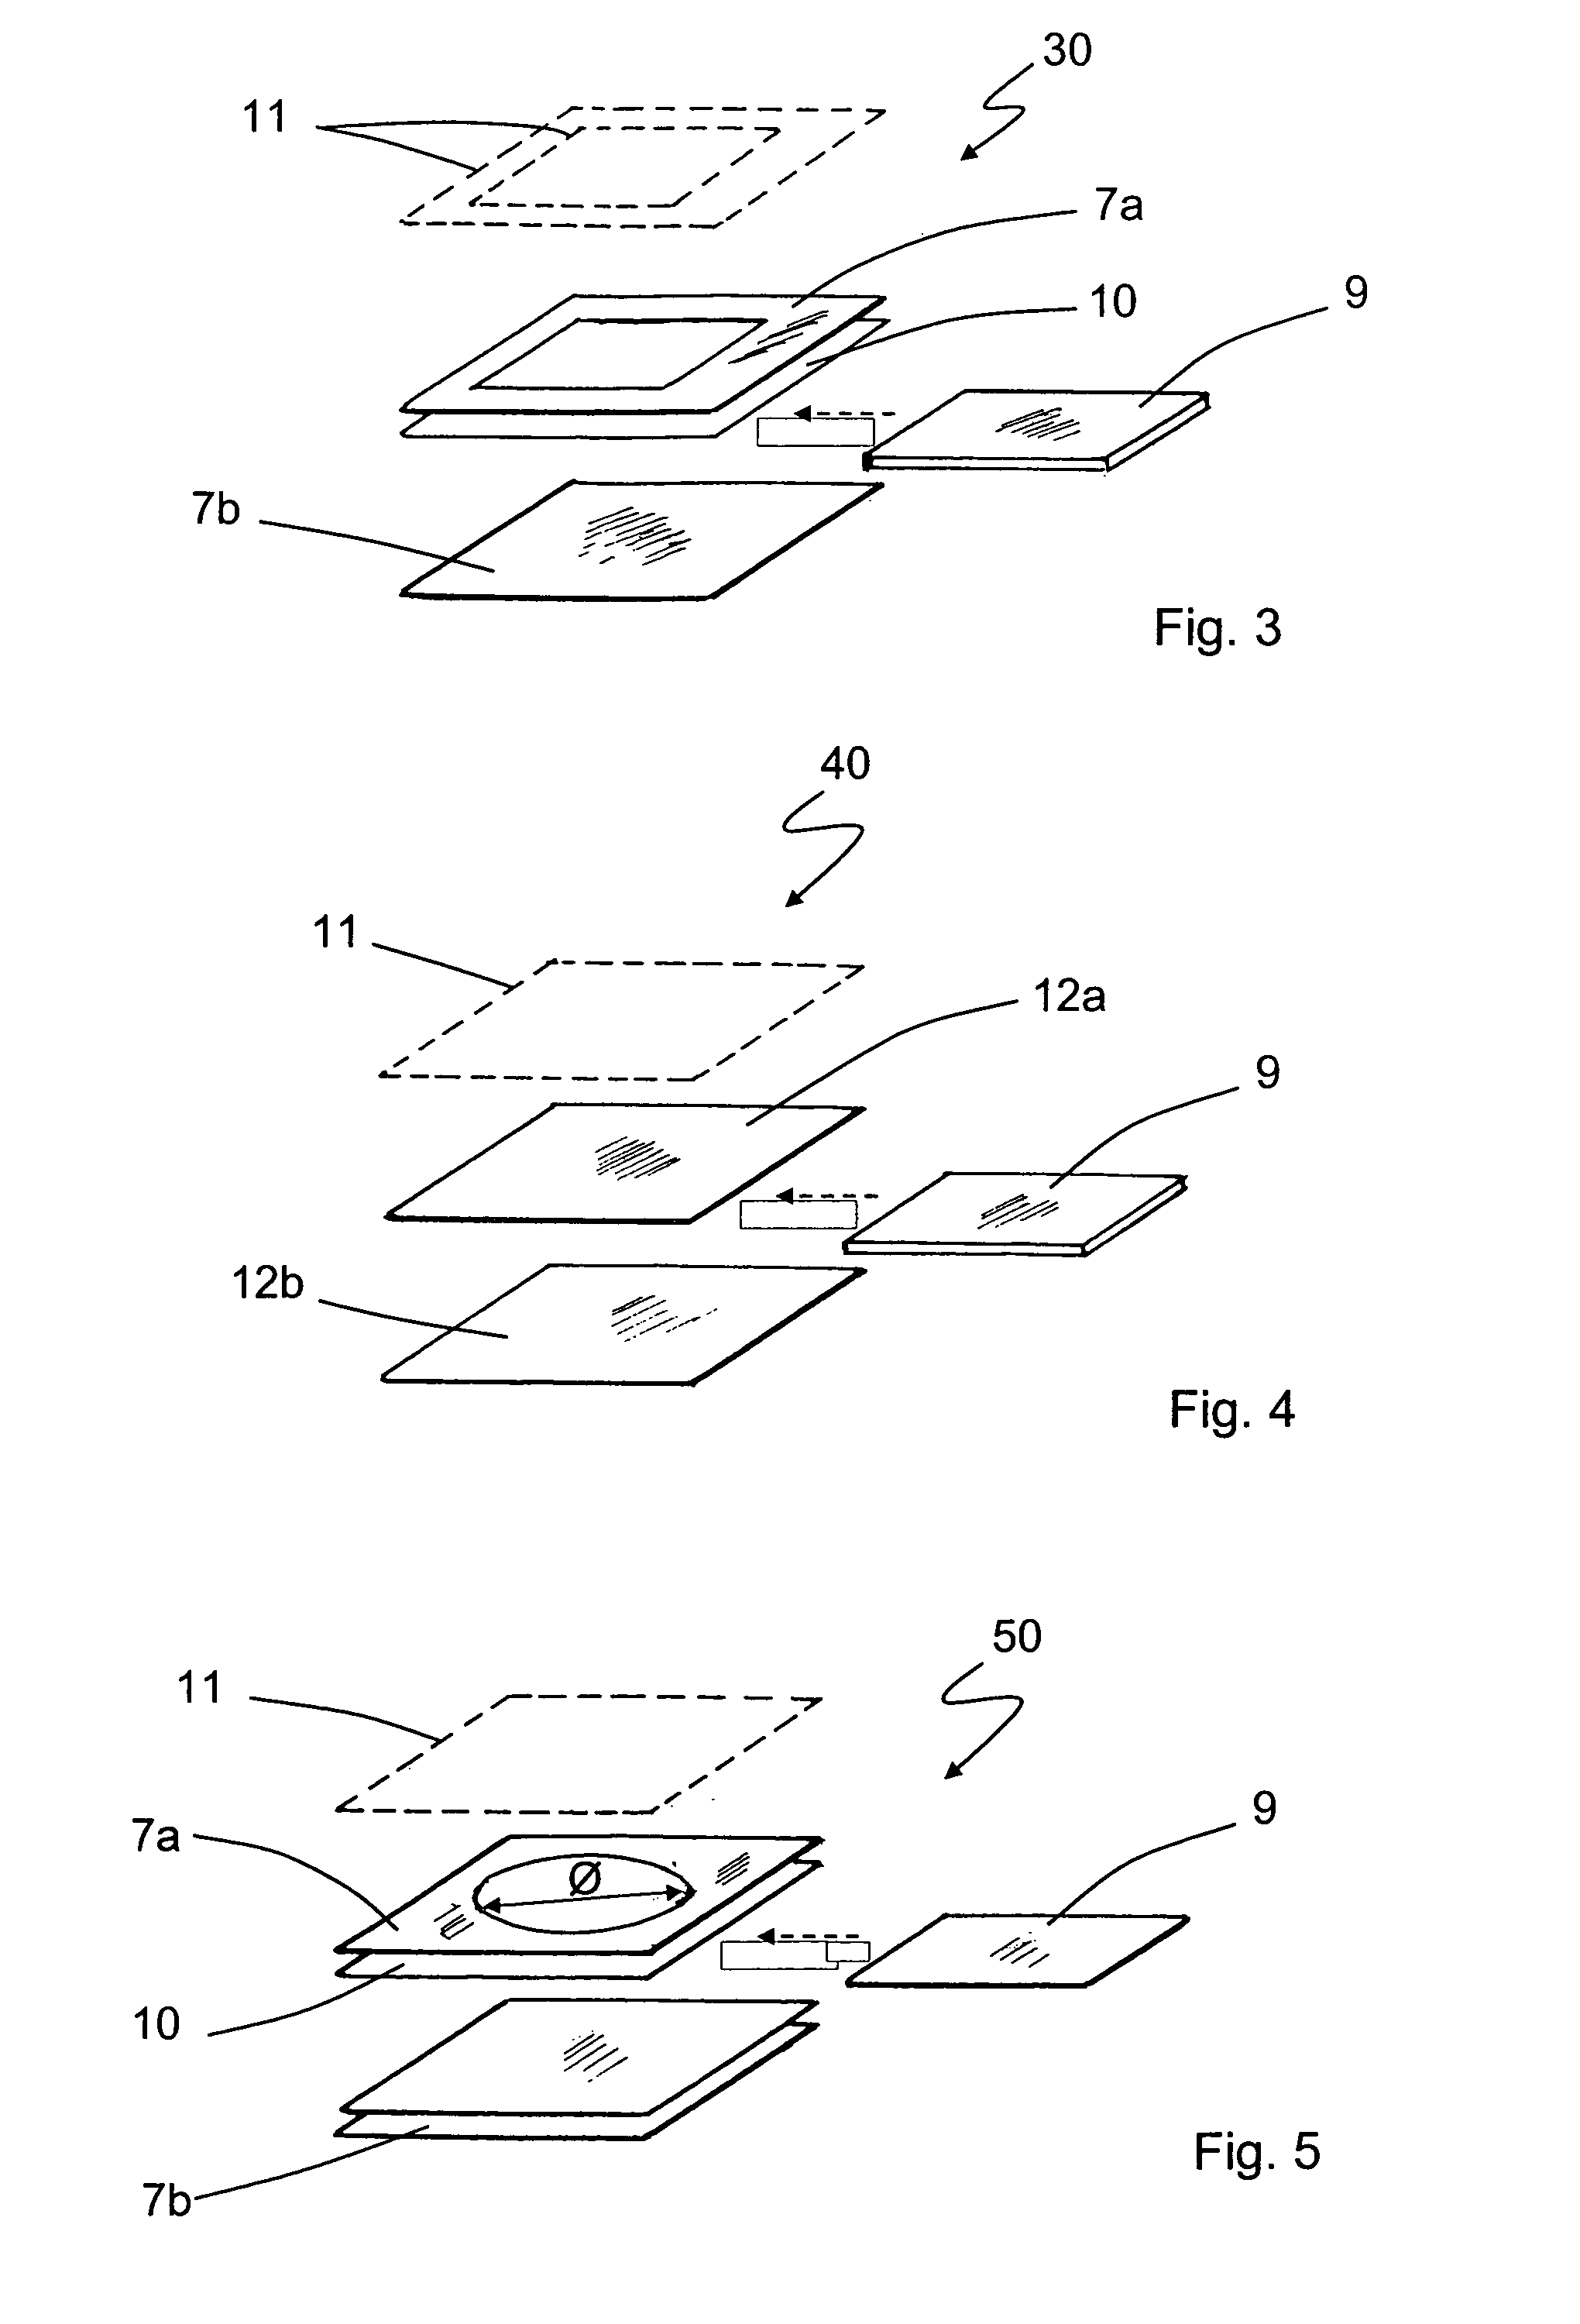 Trapping device for frugivorous insects